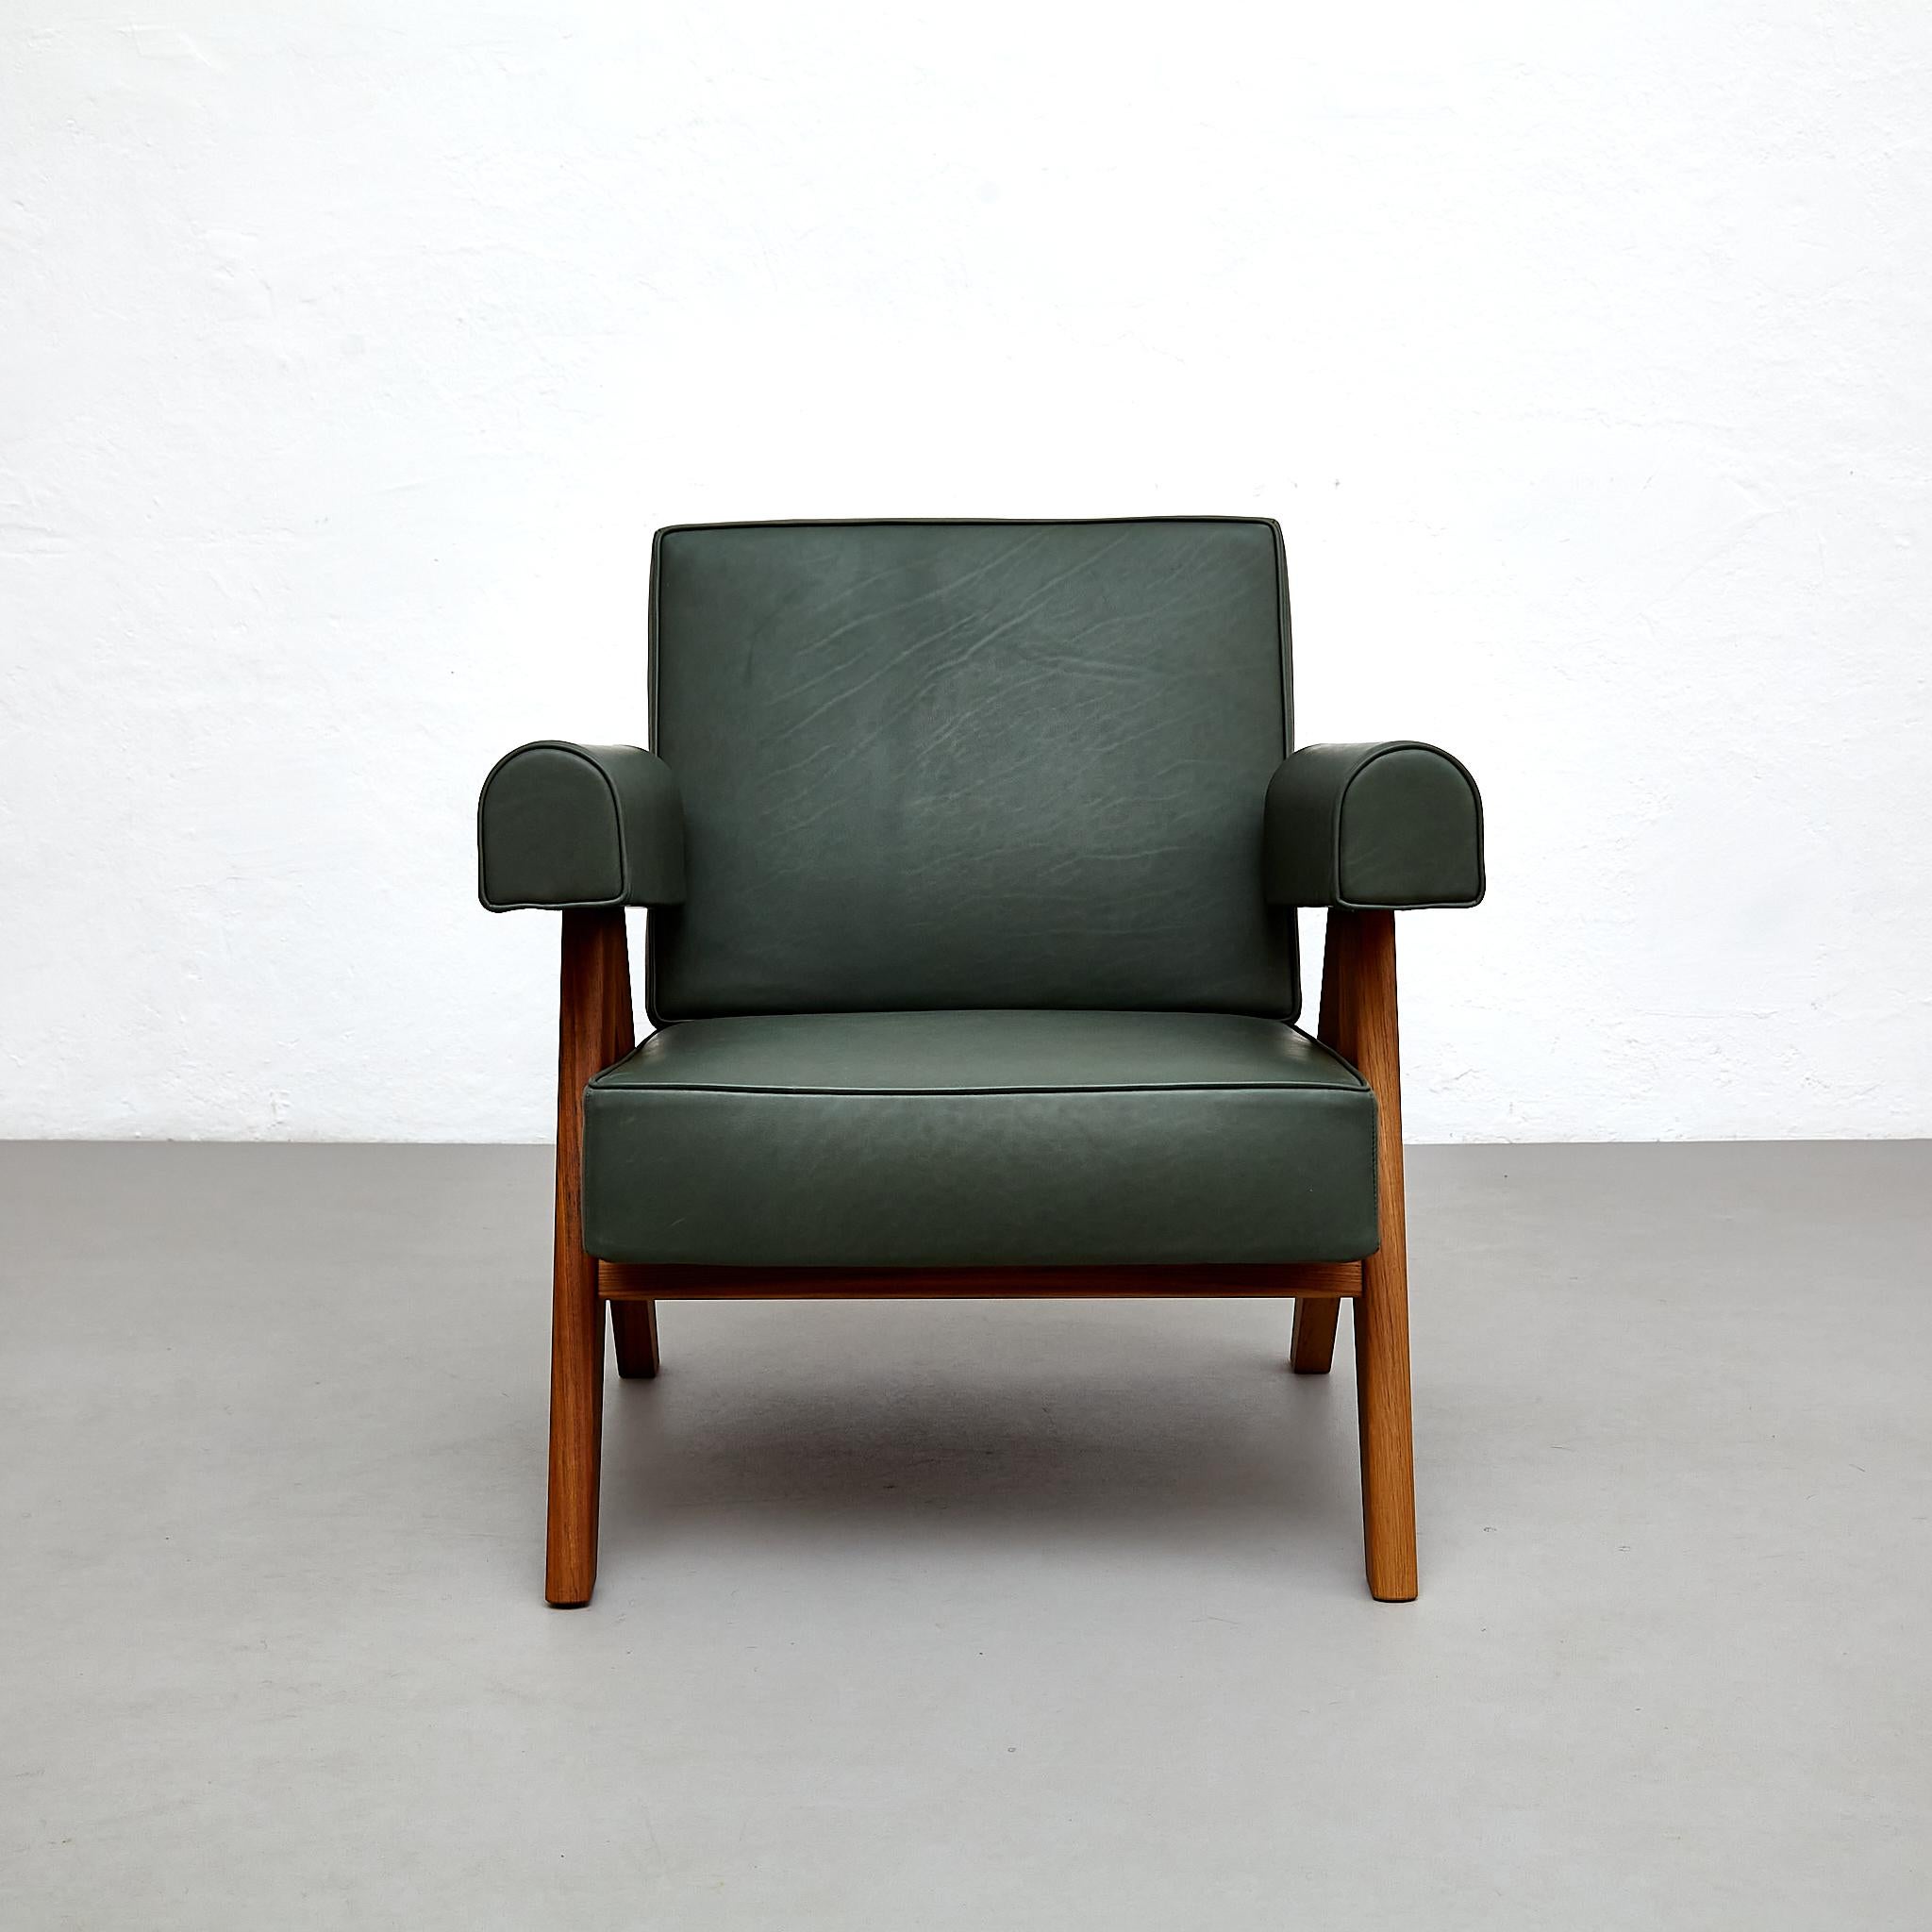 Italian Pierre Jeanneret 053 Capitol Complex Teak Wood Green Leather Armchair by Cassina For Sale